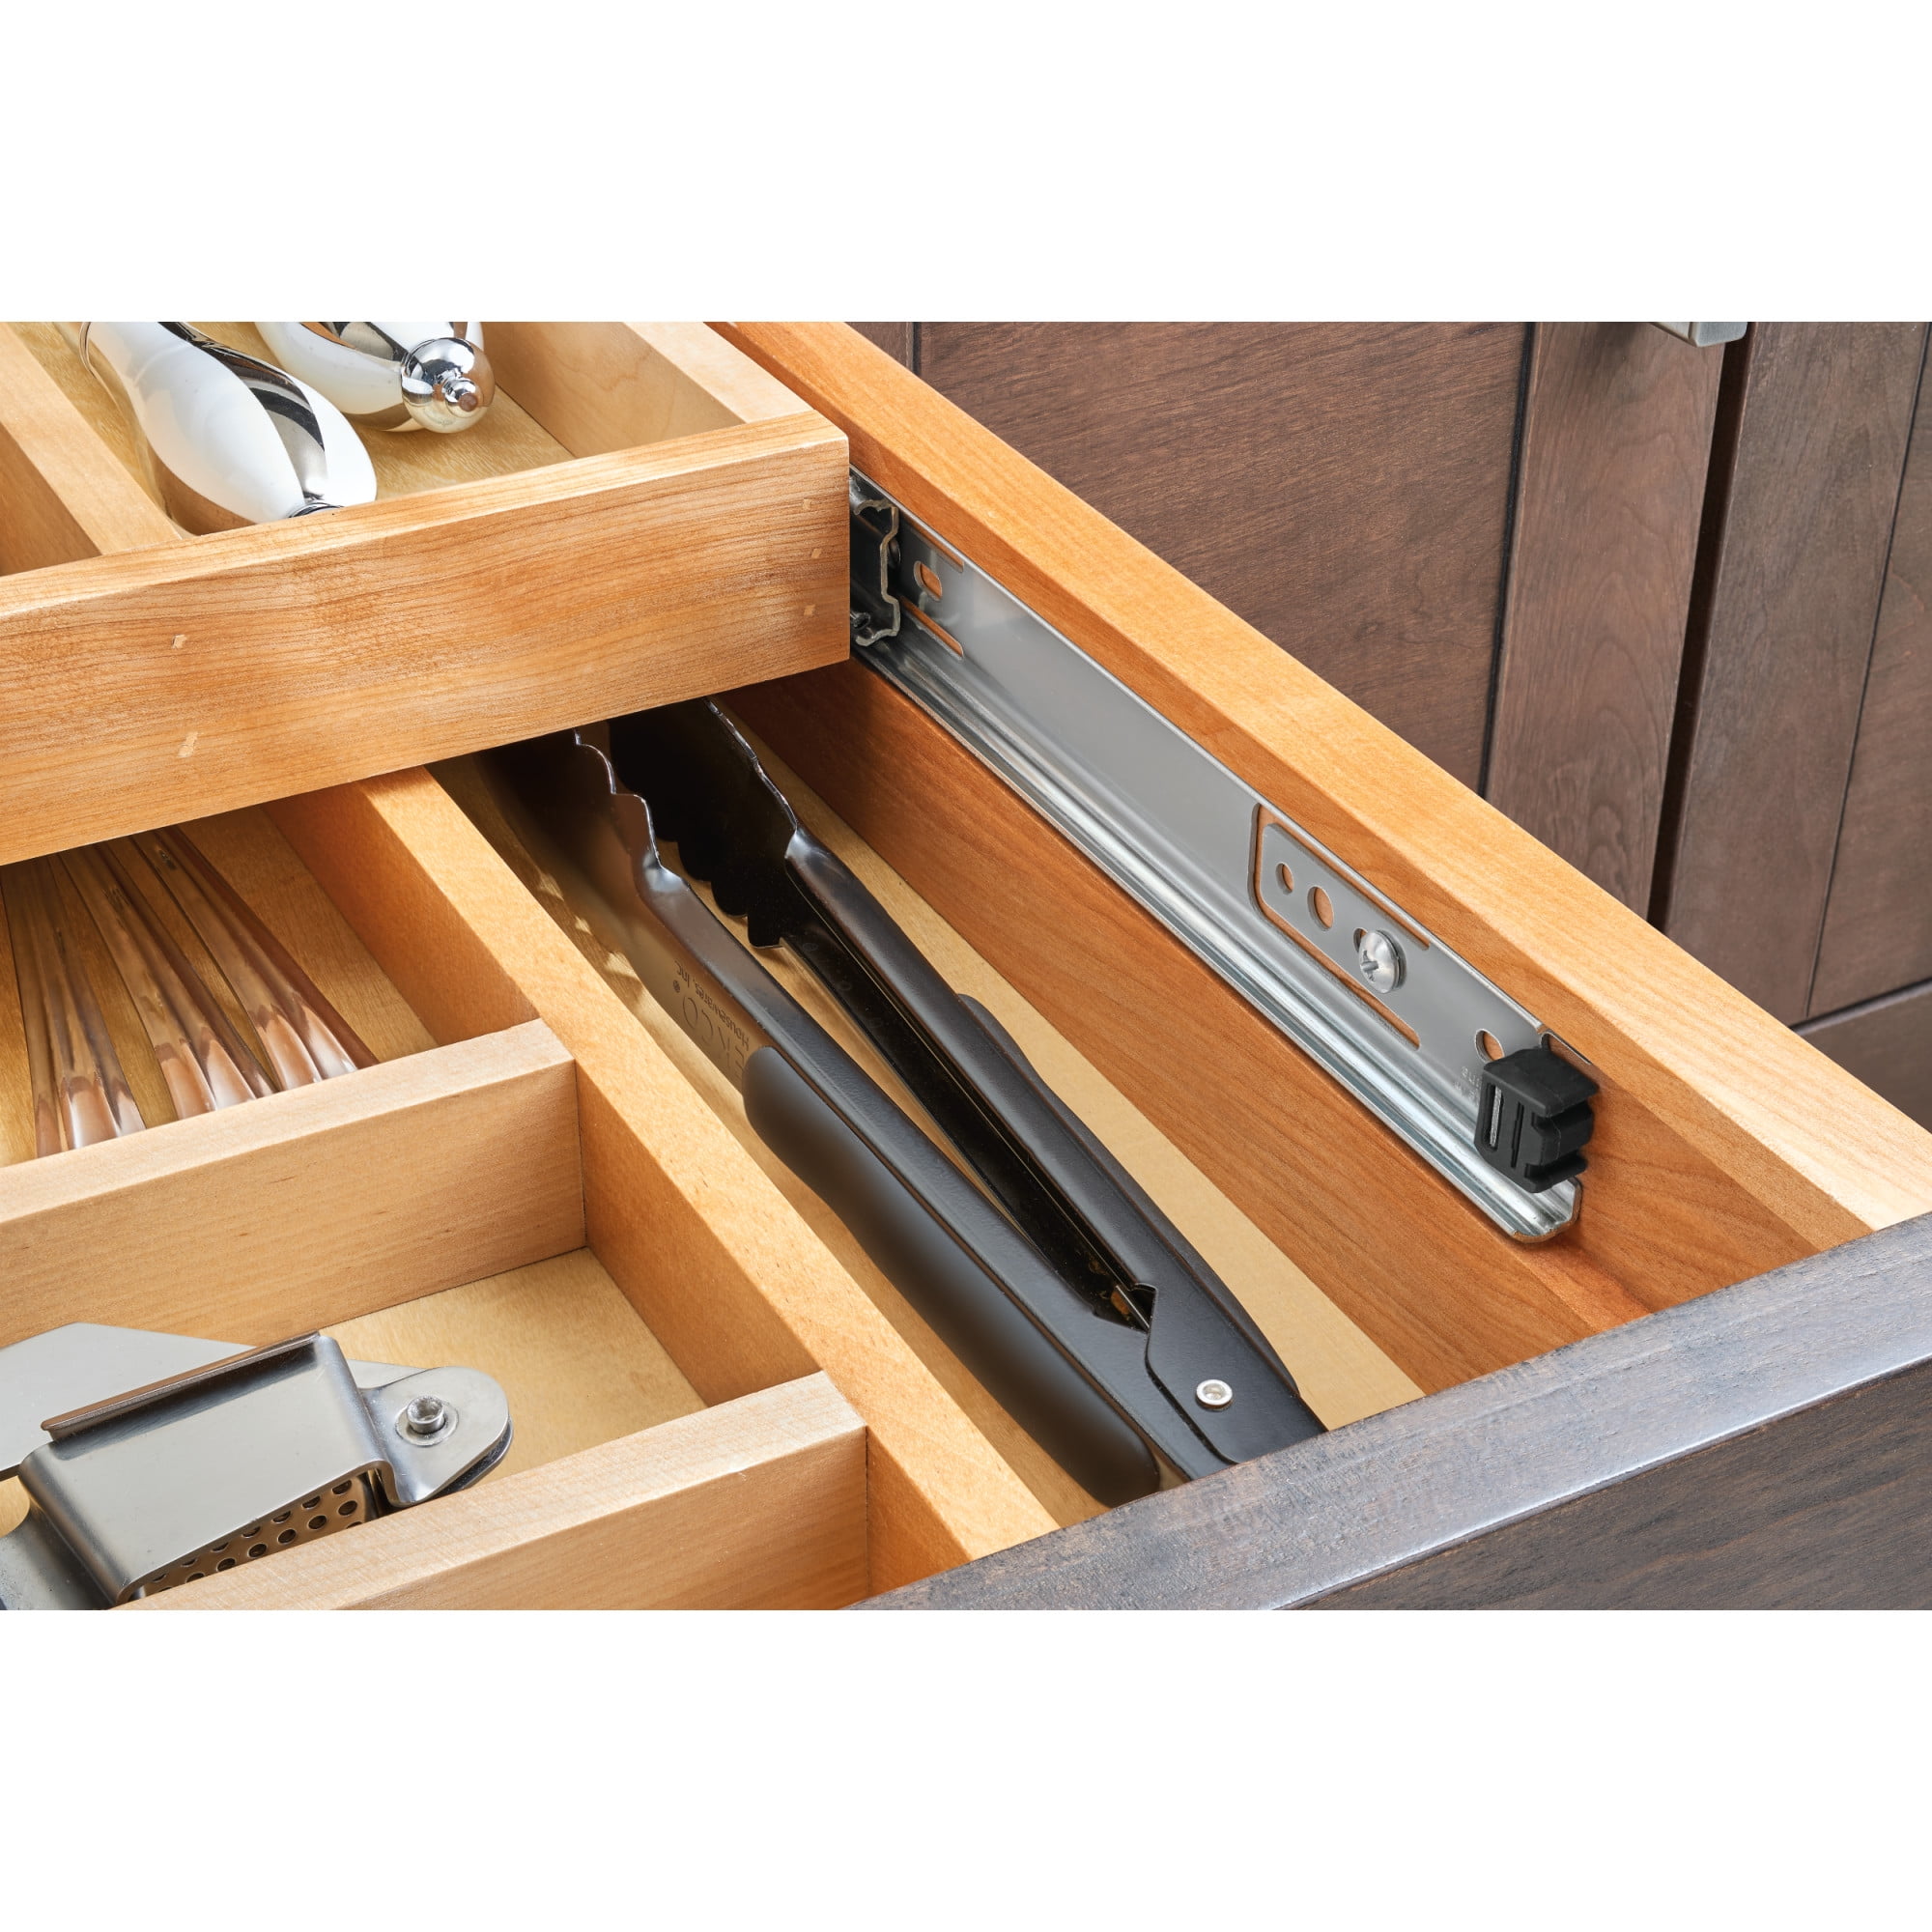 TCD18 - Wood Tiered Cutlery Drawer Organizer (fits 18 wide drawers) -  includes full extension undermount Soft Close glide set - 25-1/8 W x  19-5/8 D